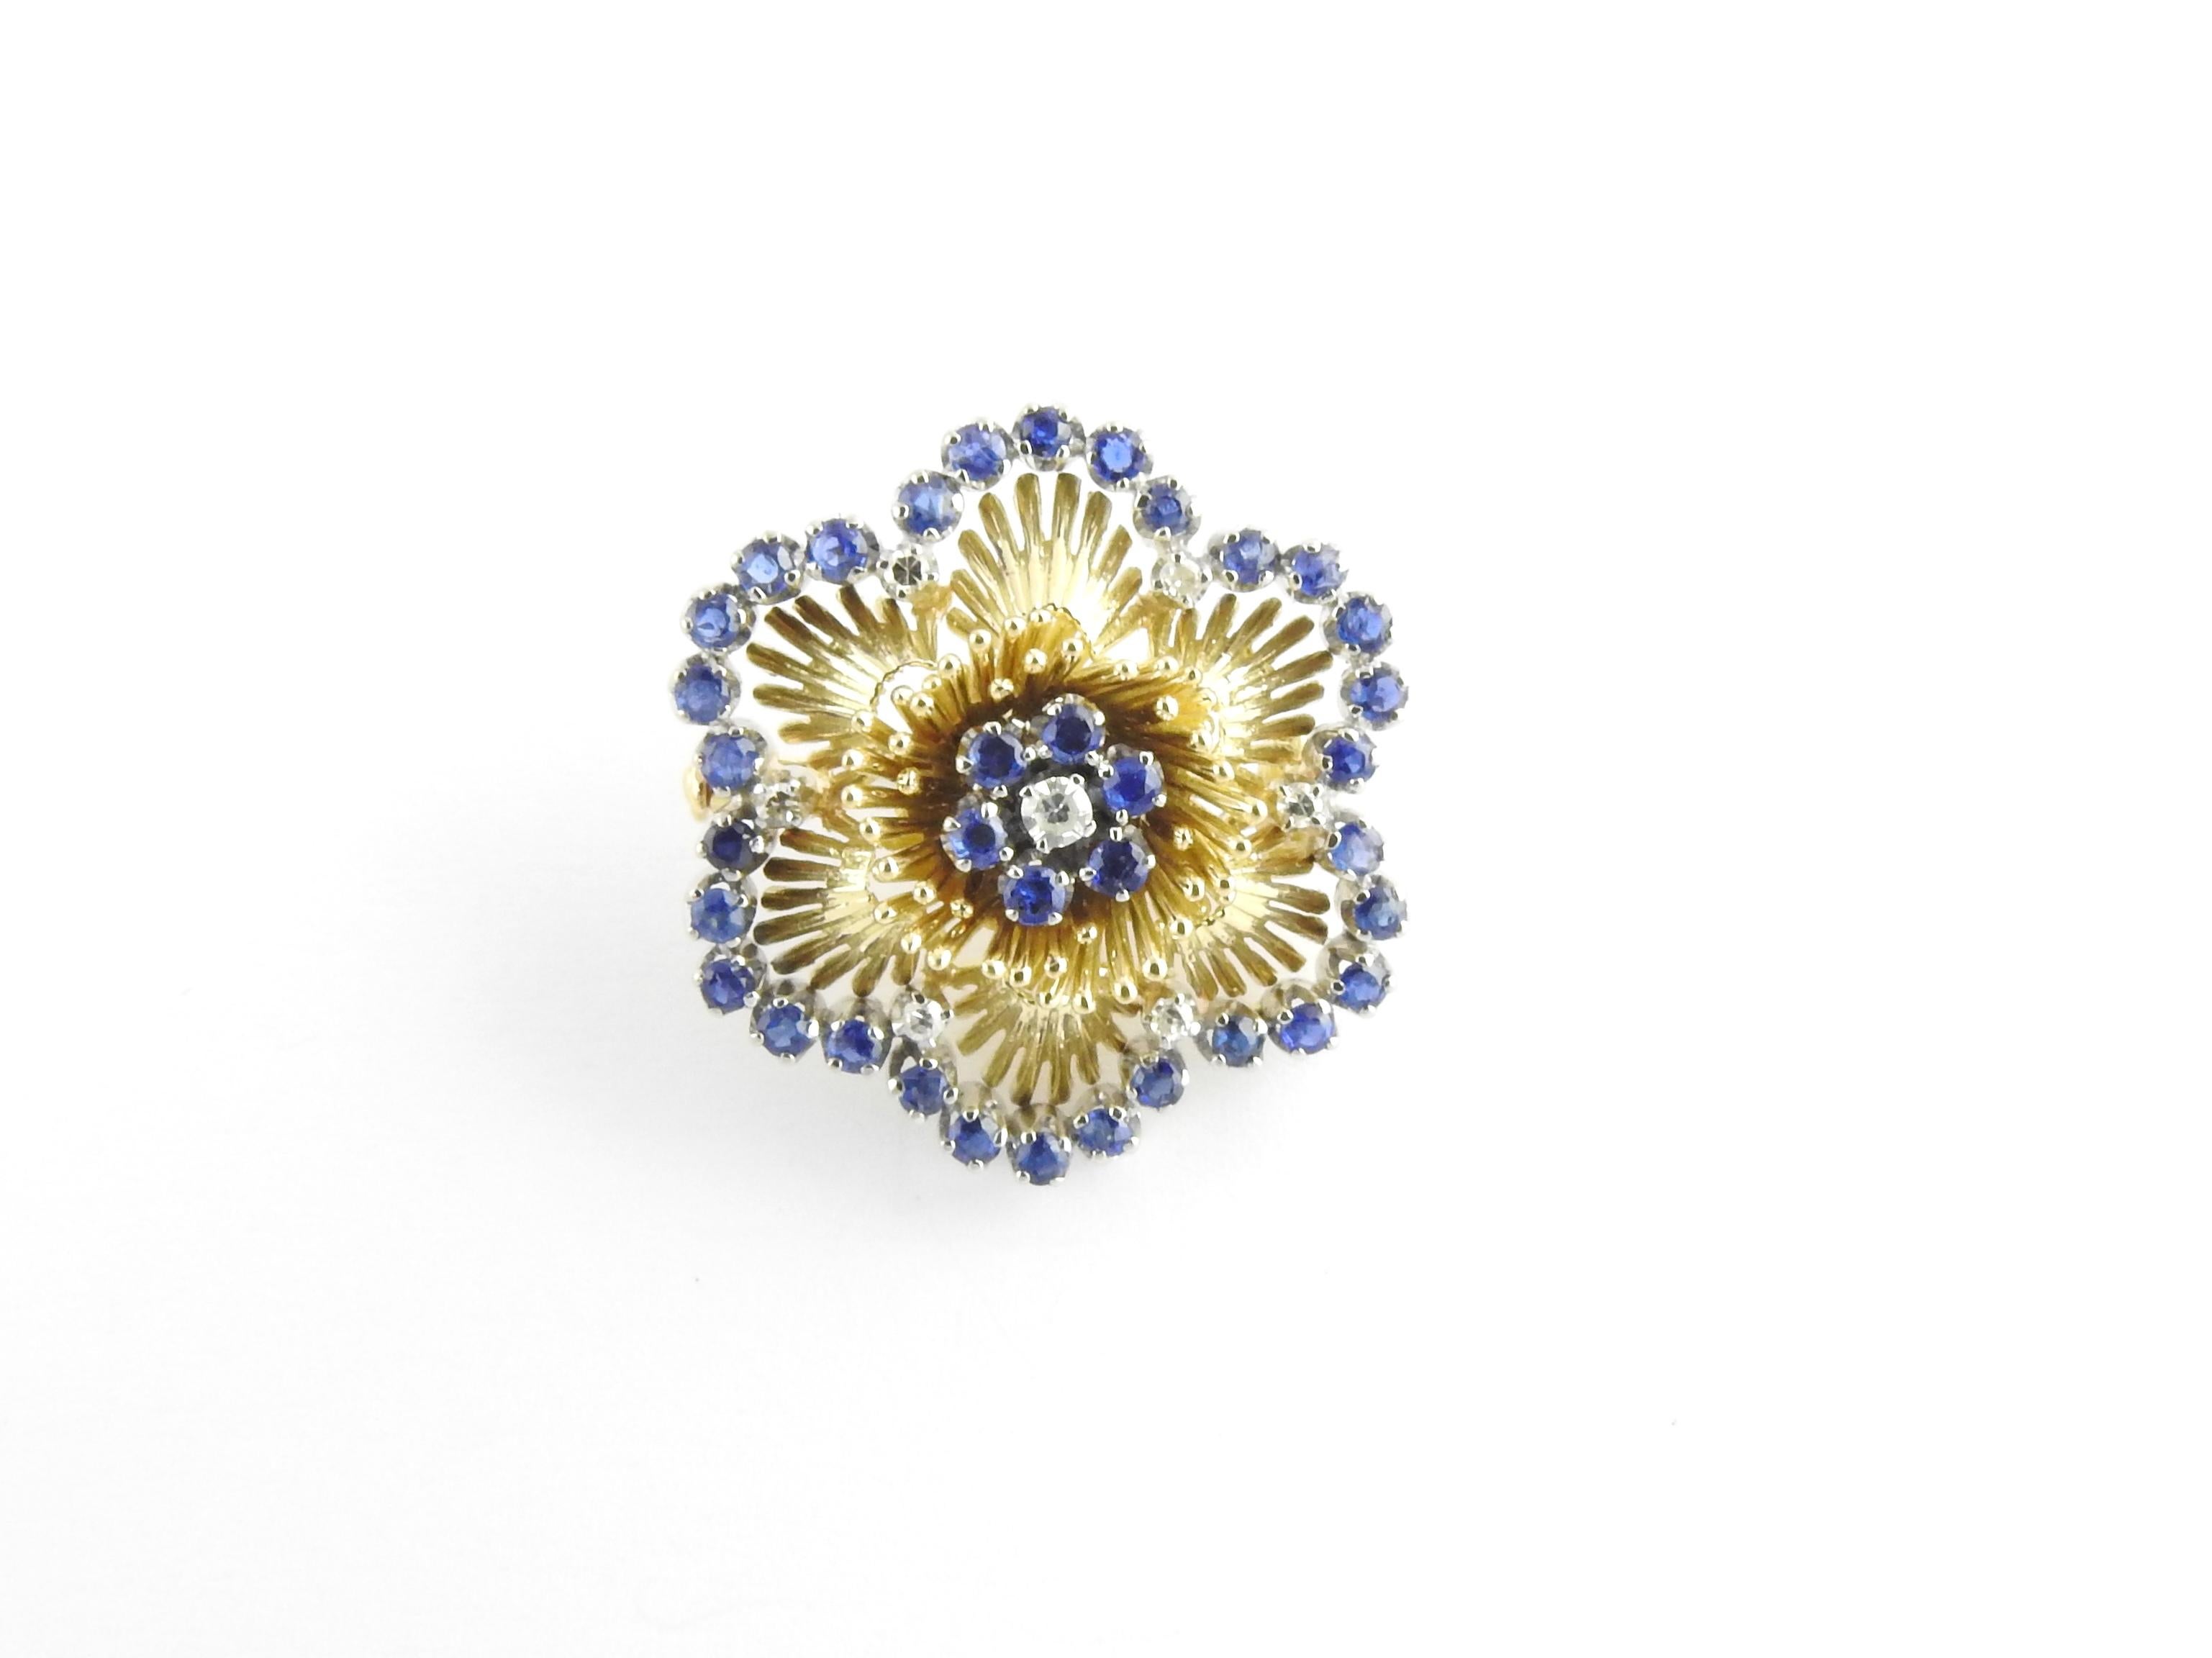 Vintage 18 Karat Yellow Gold Sapphire and Diamond Flower Brooch / Pin

This elegant 18K yellow gold brooch features seven round single cut diamonds and 36 sapphires set in a beautifully detailed floral design.

Approximate total diamond weight: .15